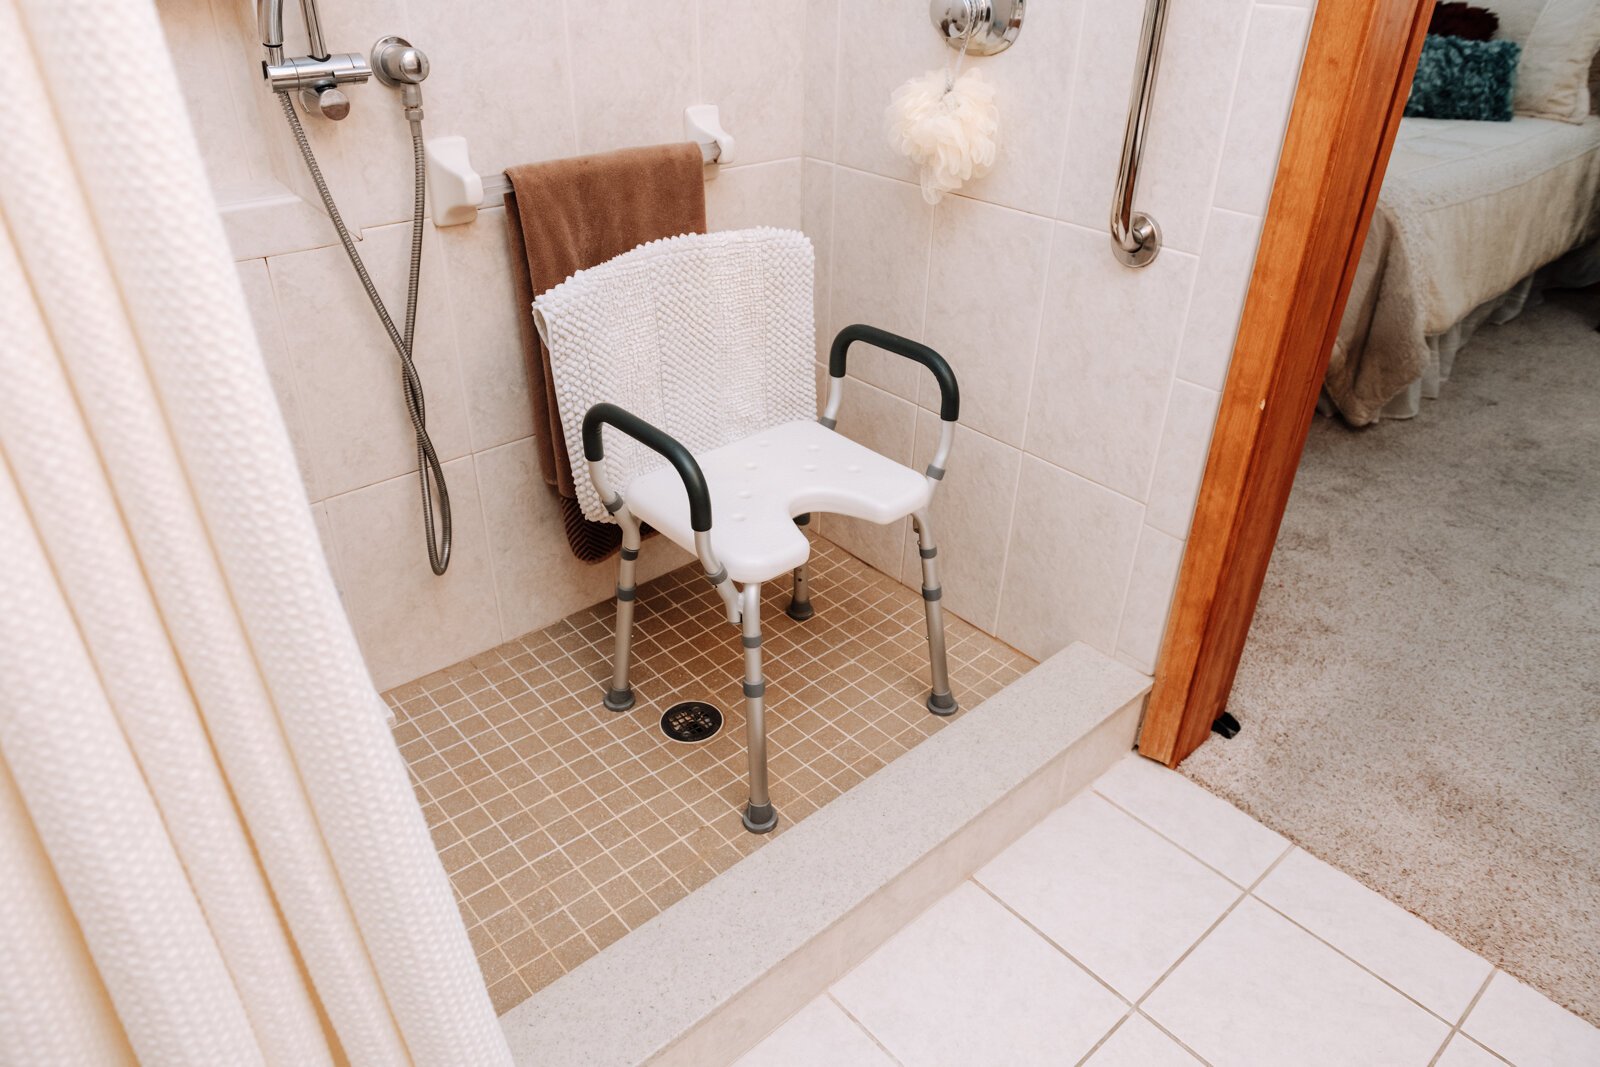 Because of the placement of the drain in the master suite bathroom at Ron Duchovic's home, the step into the shower could not be completely flattened, making it not accessible for a wheelchair user.